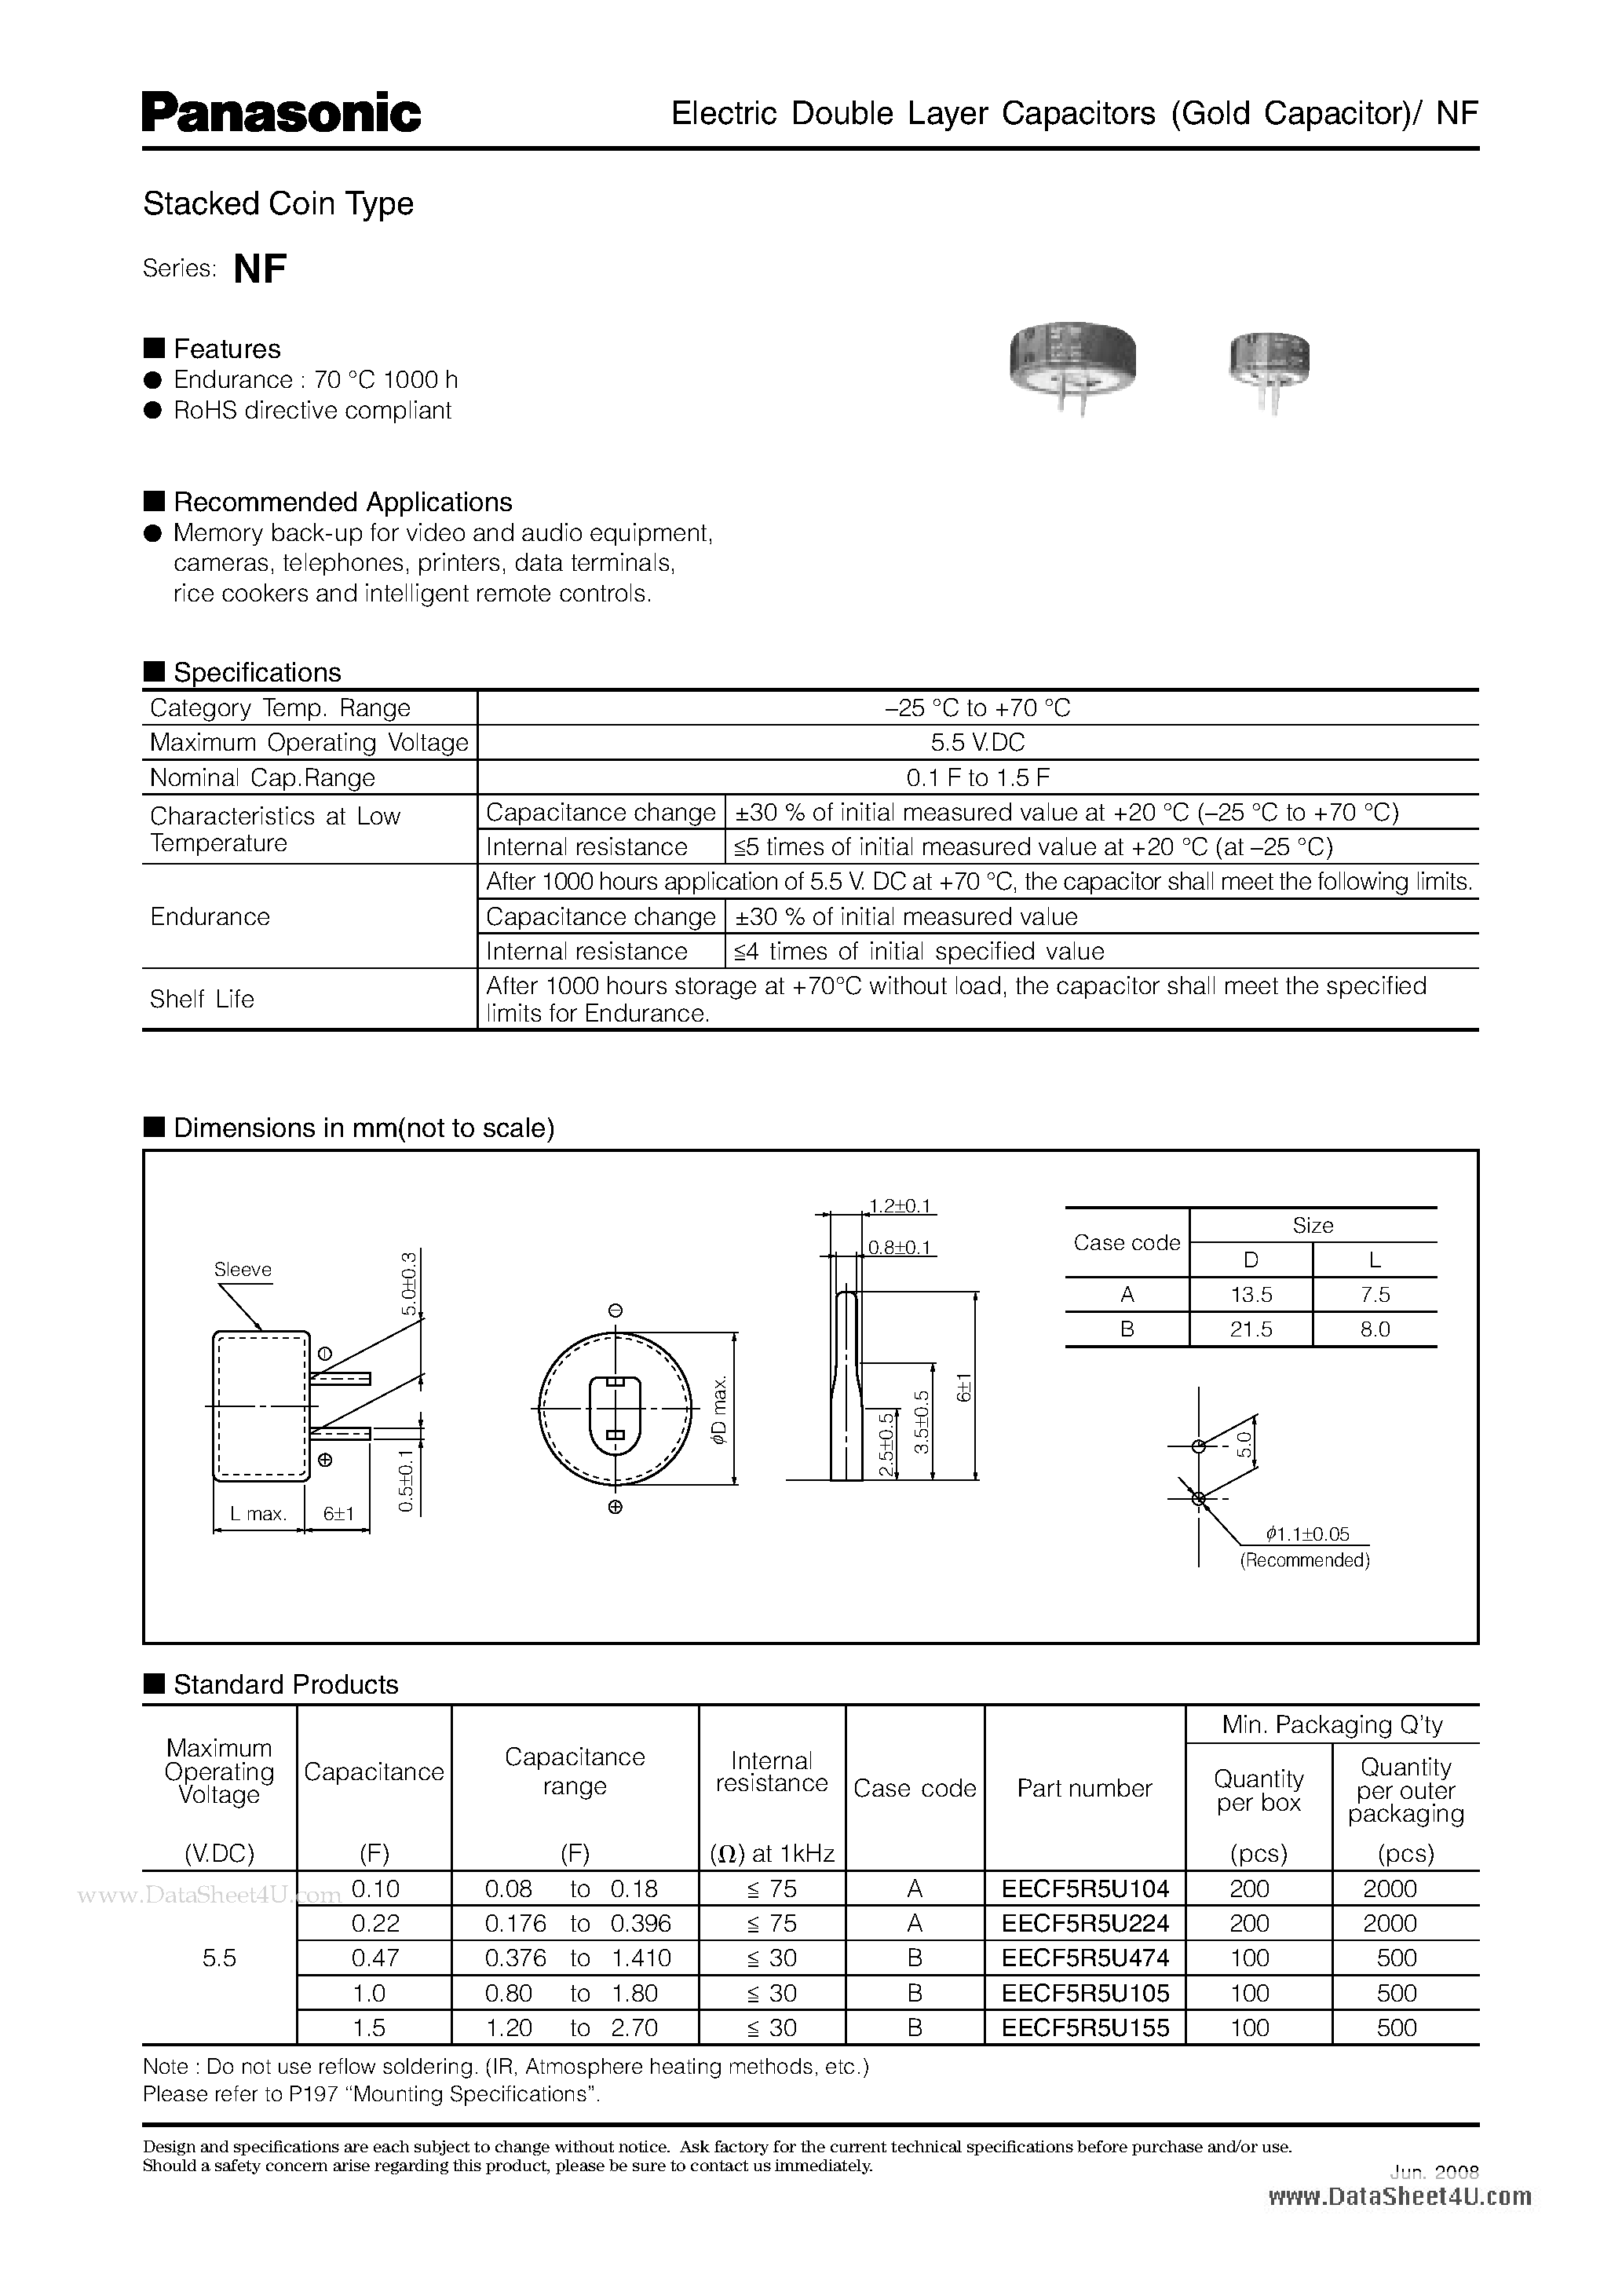 Datasheet EECF5R5U104 - Electric Double Layer Capacitors (Gold Capacitor)/ NF page 1